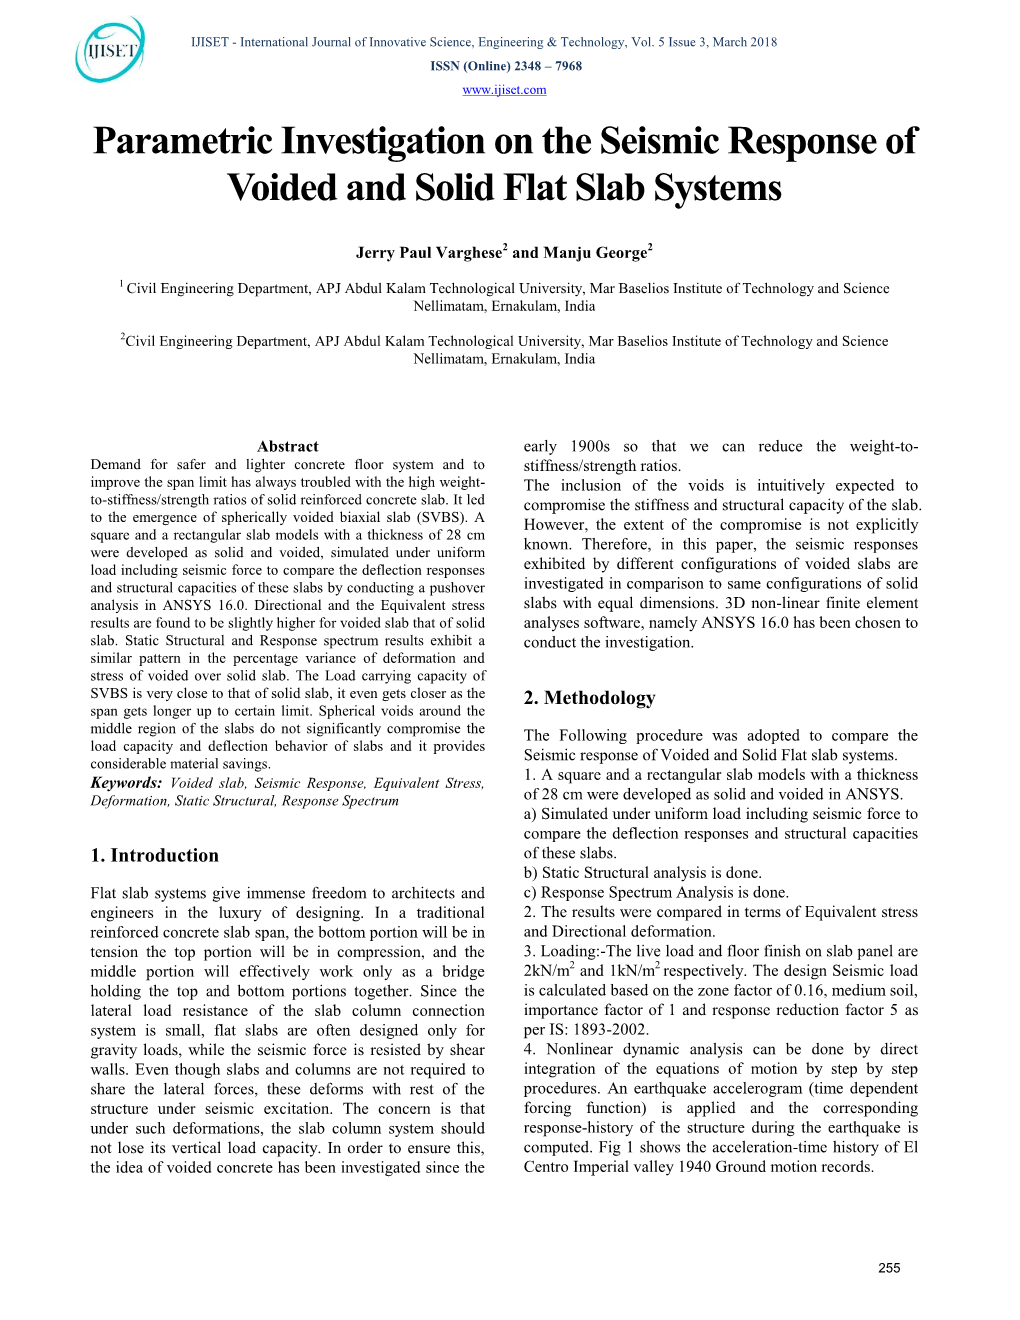 Parametric Investigation on the Seismic Response of Voided and Solid Flat Slab Systems